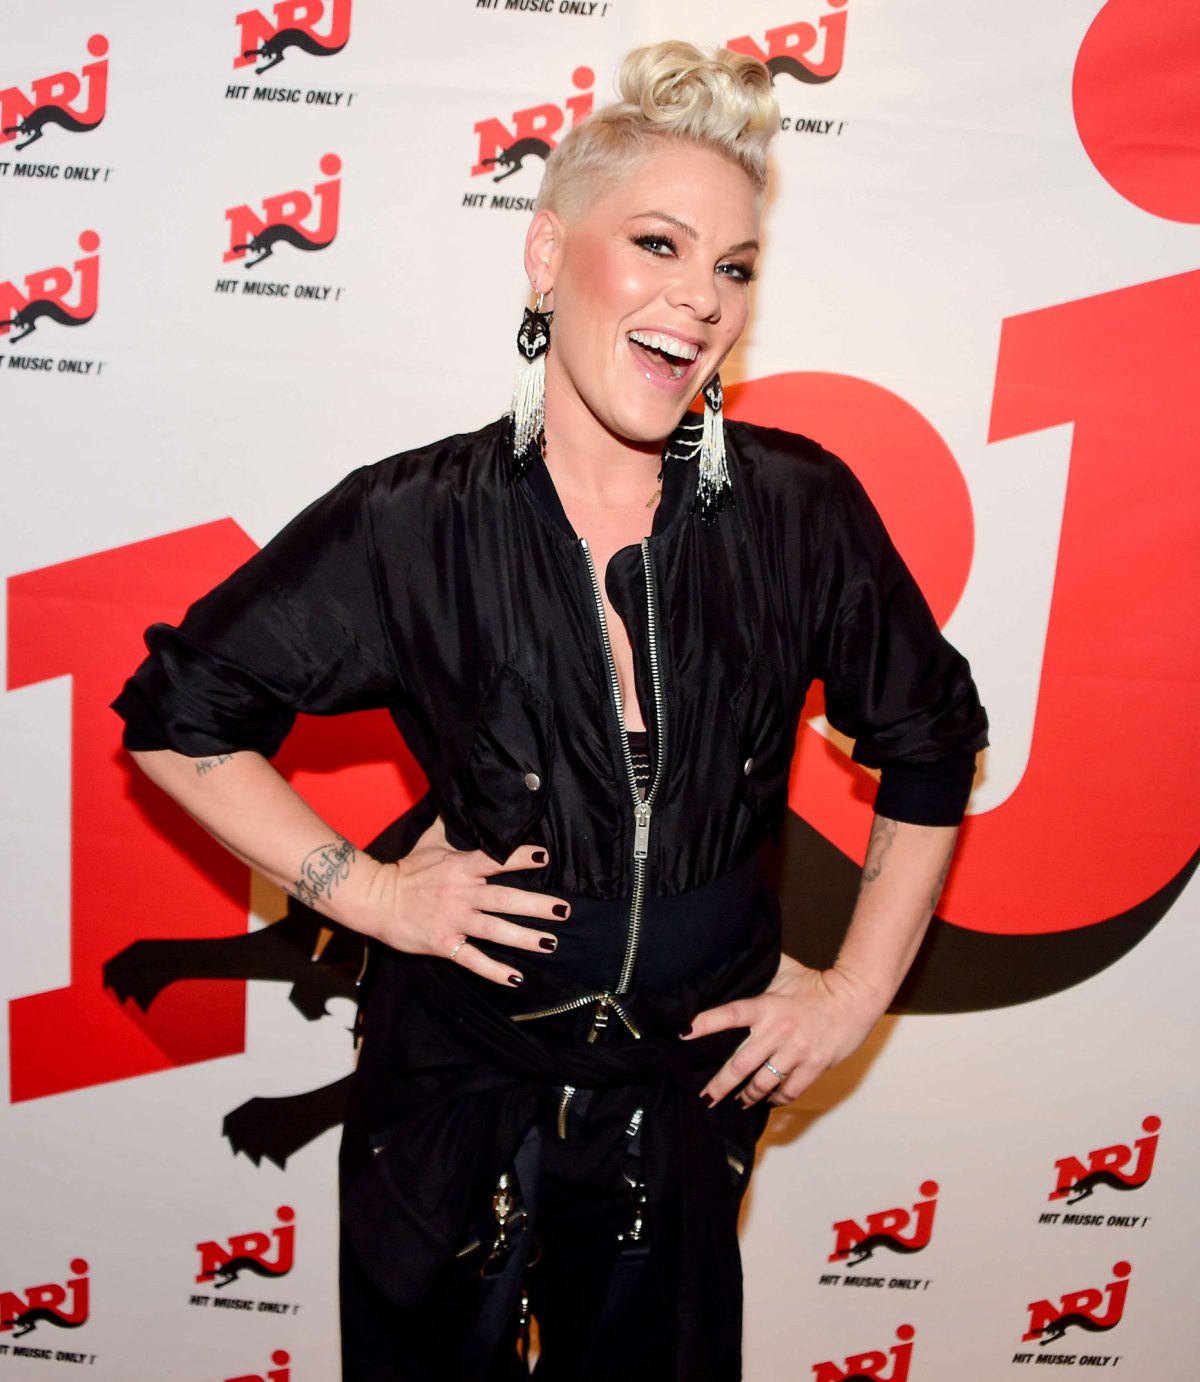 Check Out Singer Pink's Transformation Over the Years